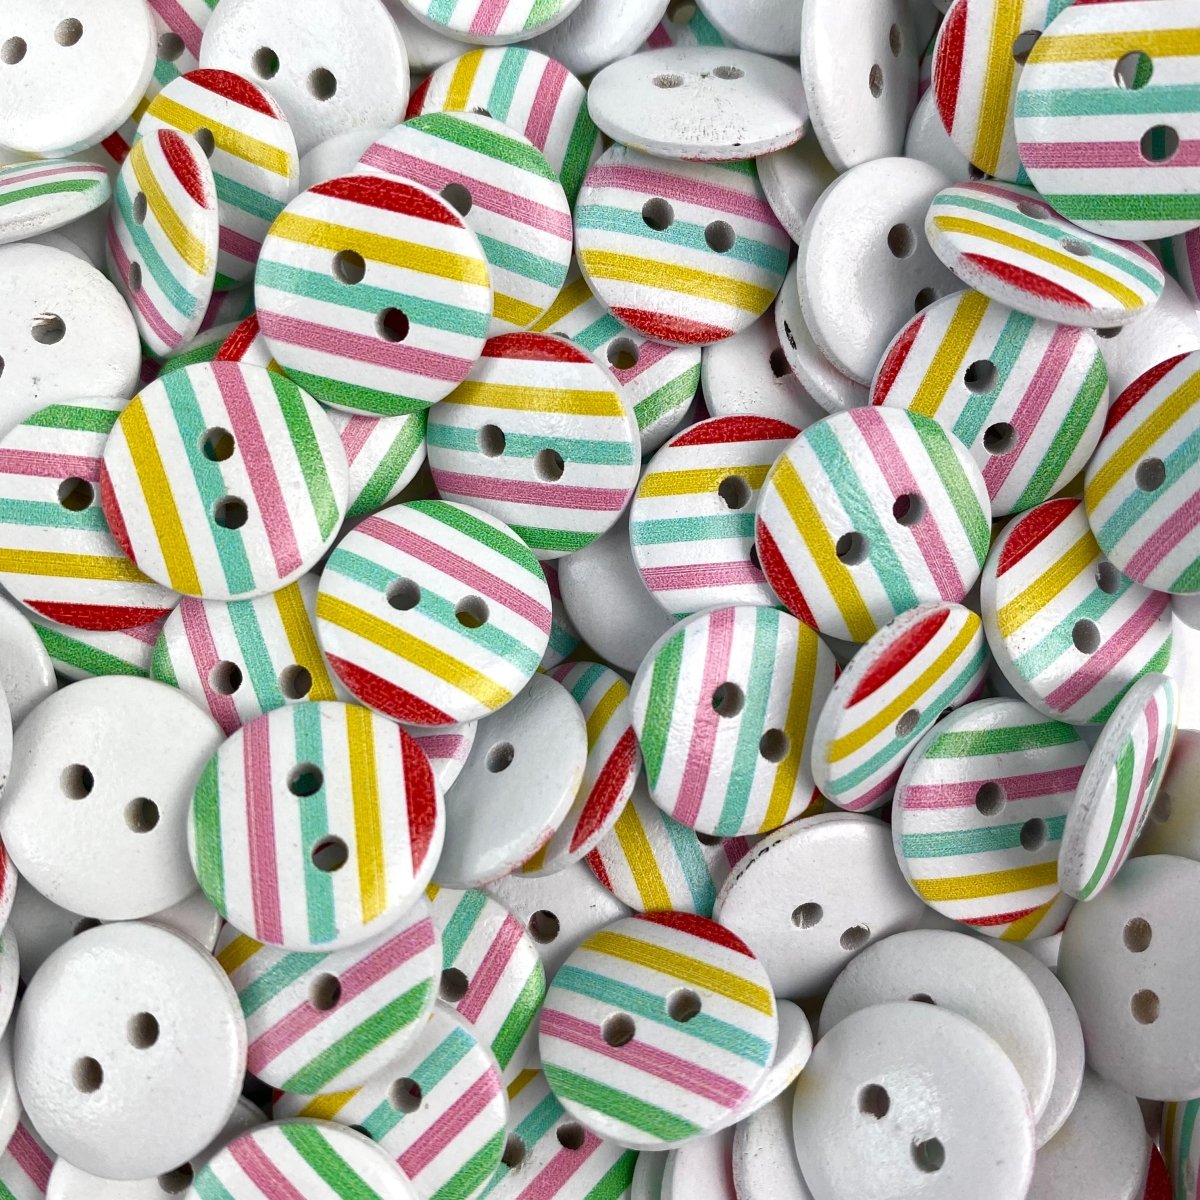 Sewing Gem - 2 Hole, Printed, Striped, Wooden Button - 15mm - multiple colours available - Sewing Gem